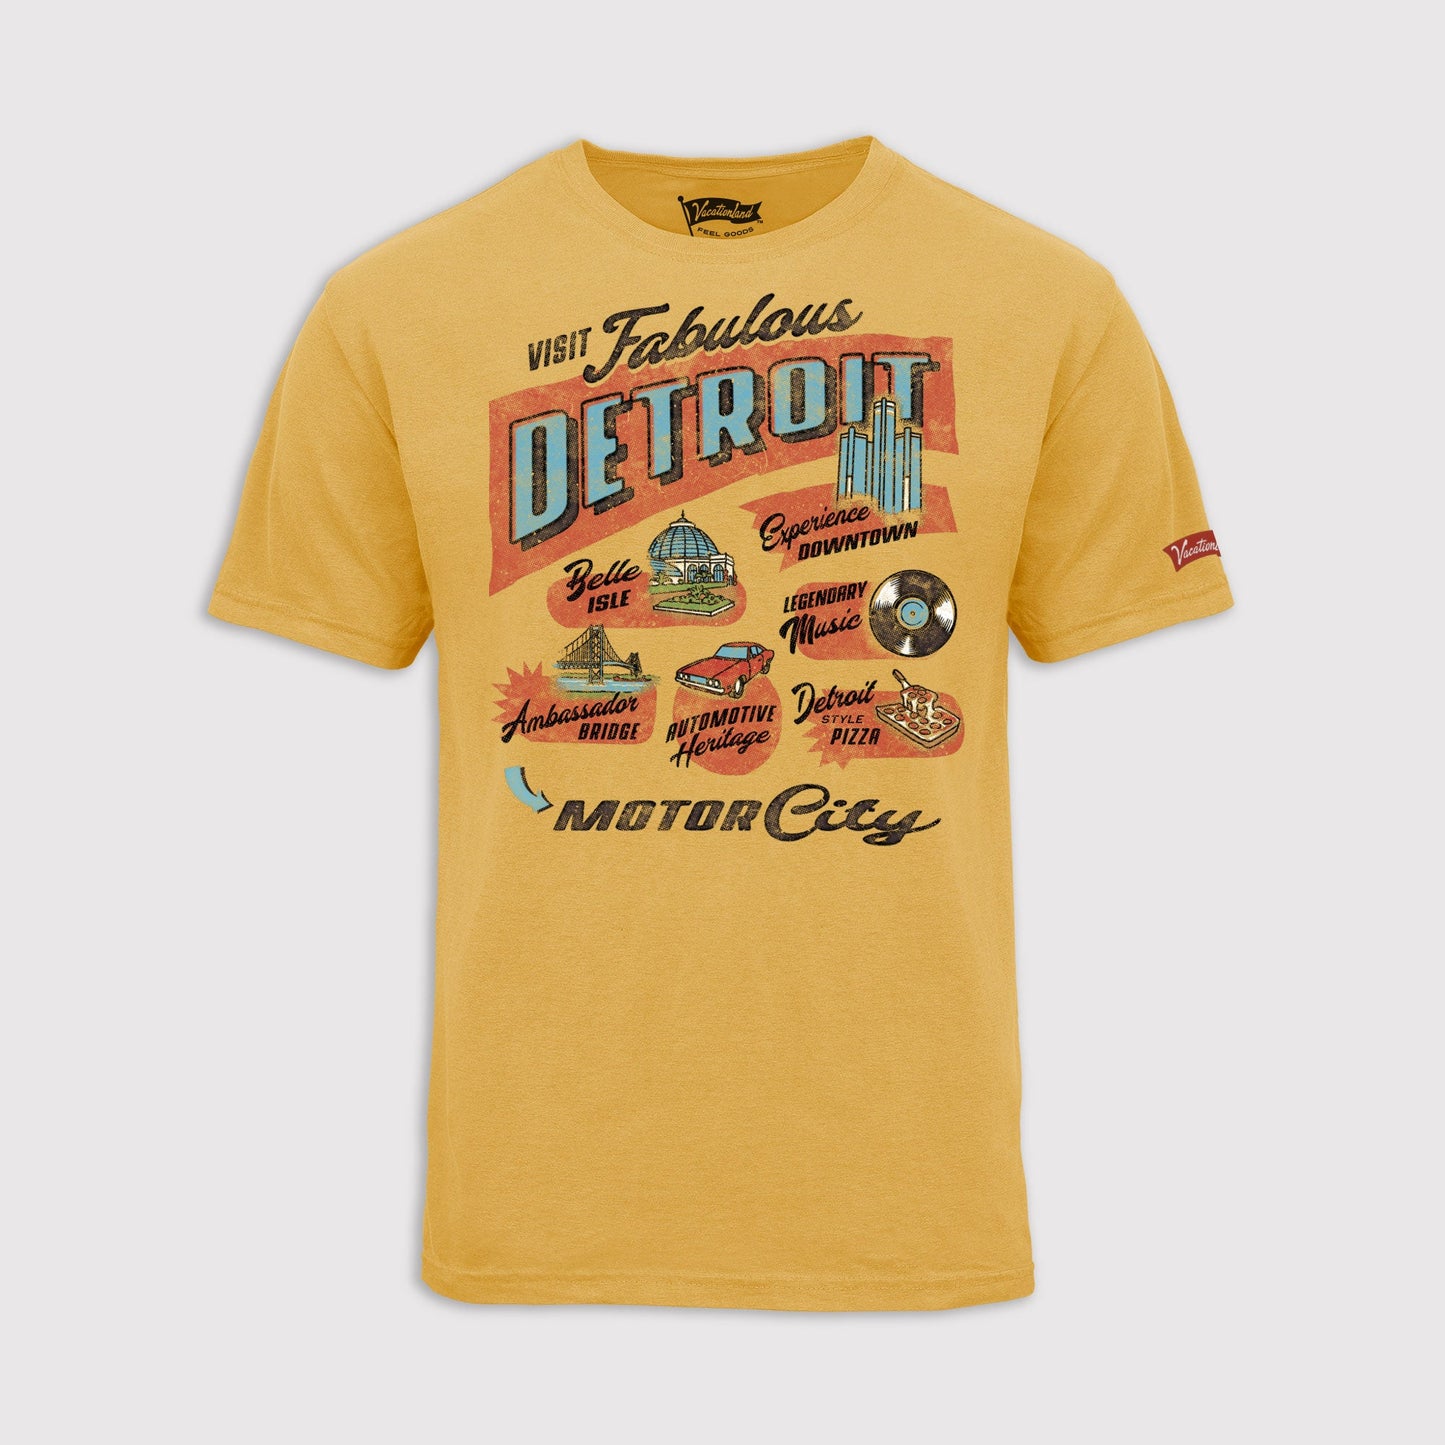 Guided Tour Tee - Detroit